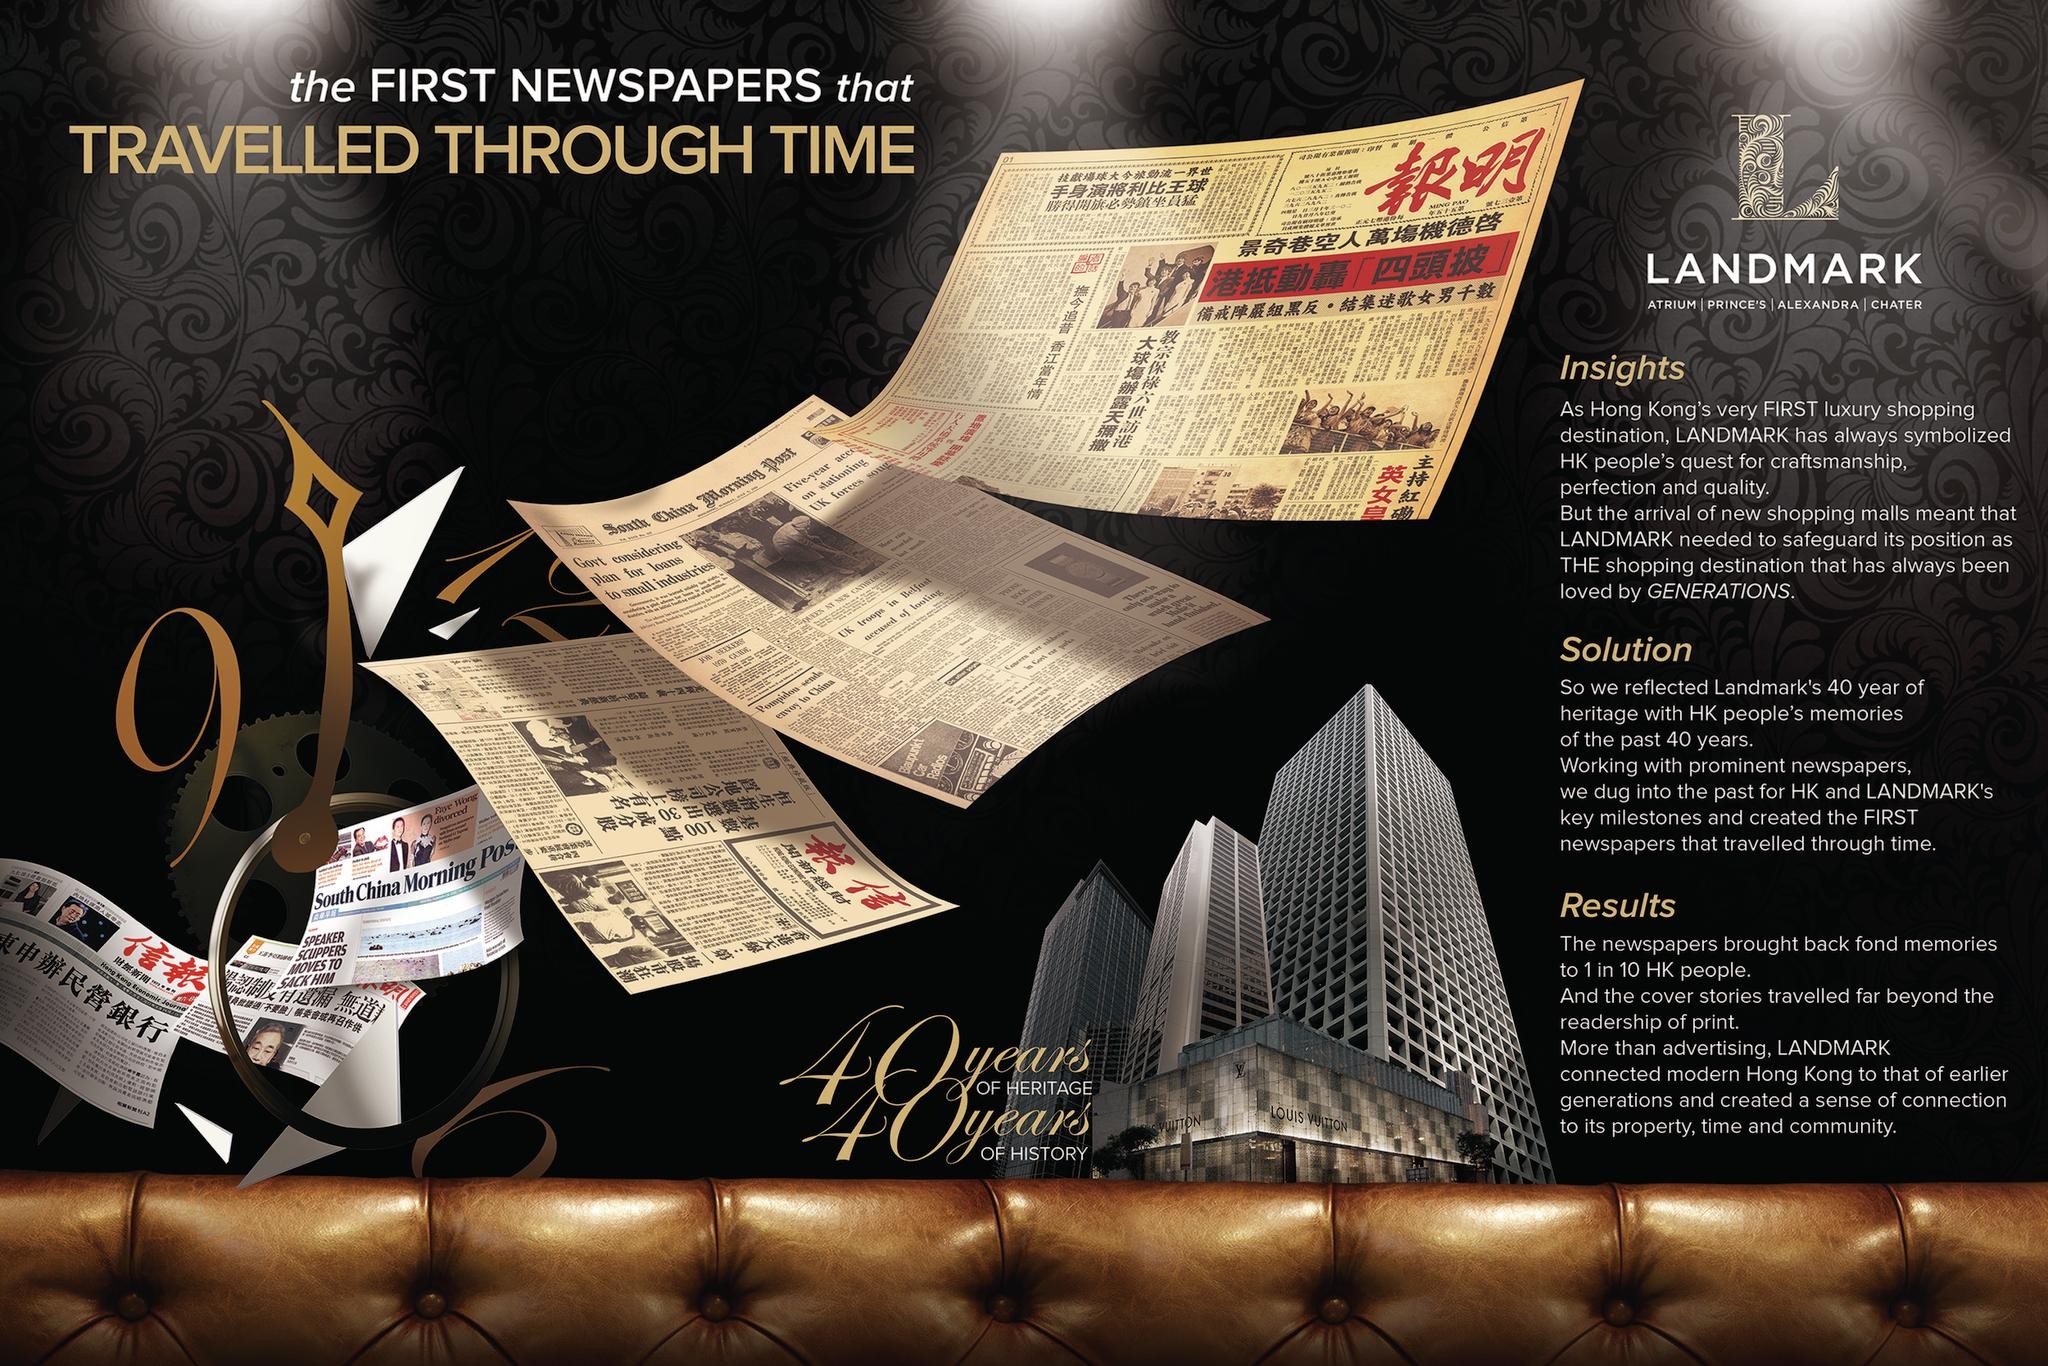 THE FIRST NEWSPAPER THAT TRAVELLED THROUGH TIME